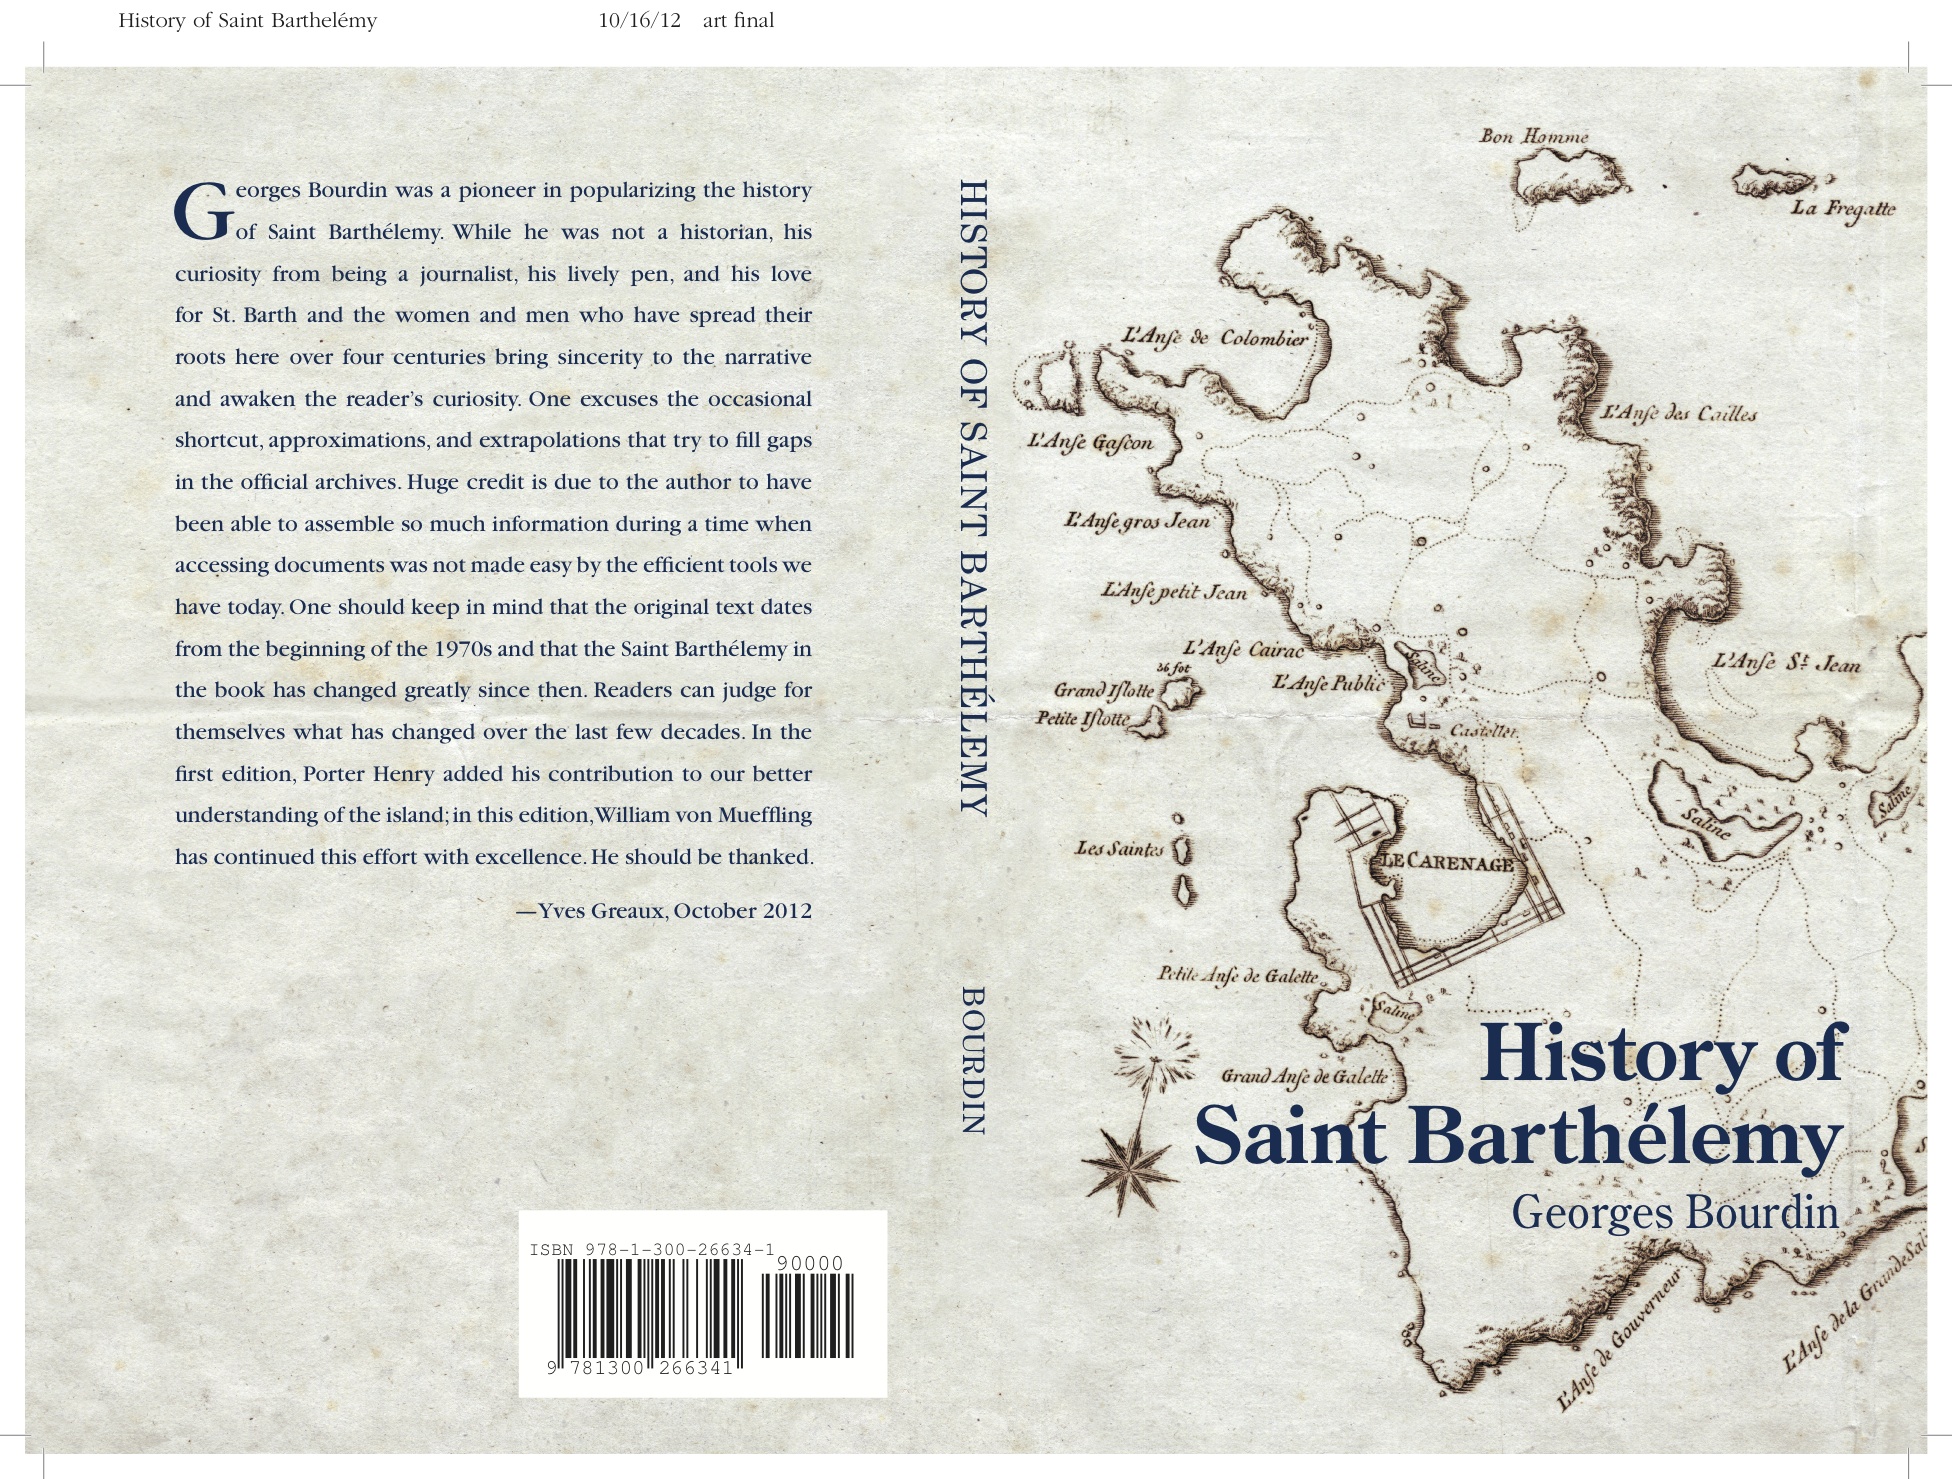 HistoryStBarth_cover_ENG_final